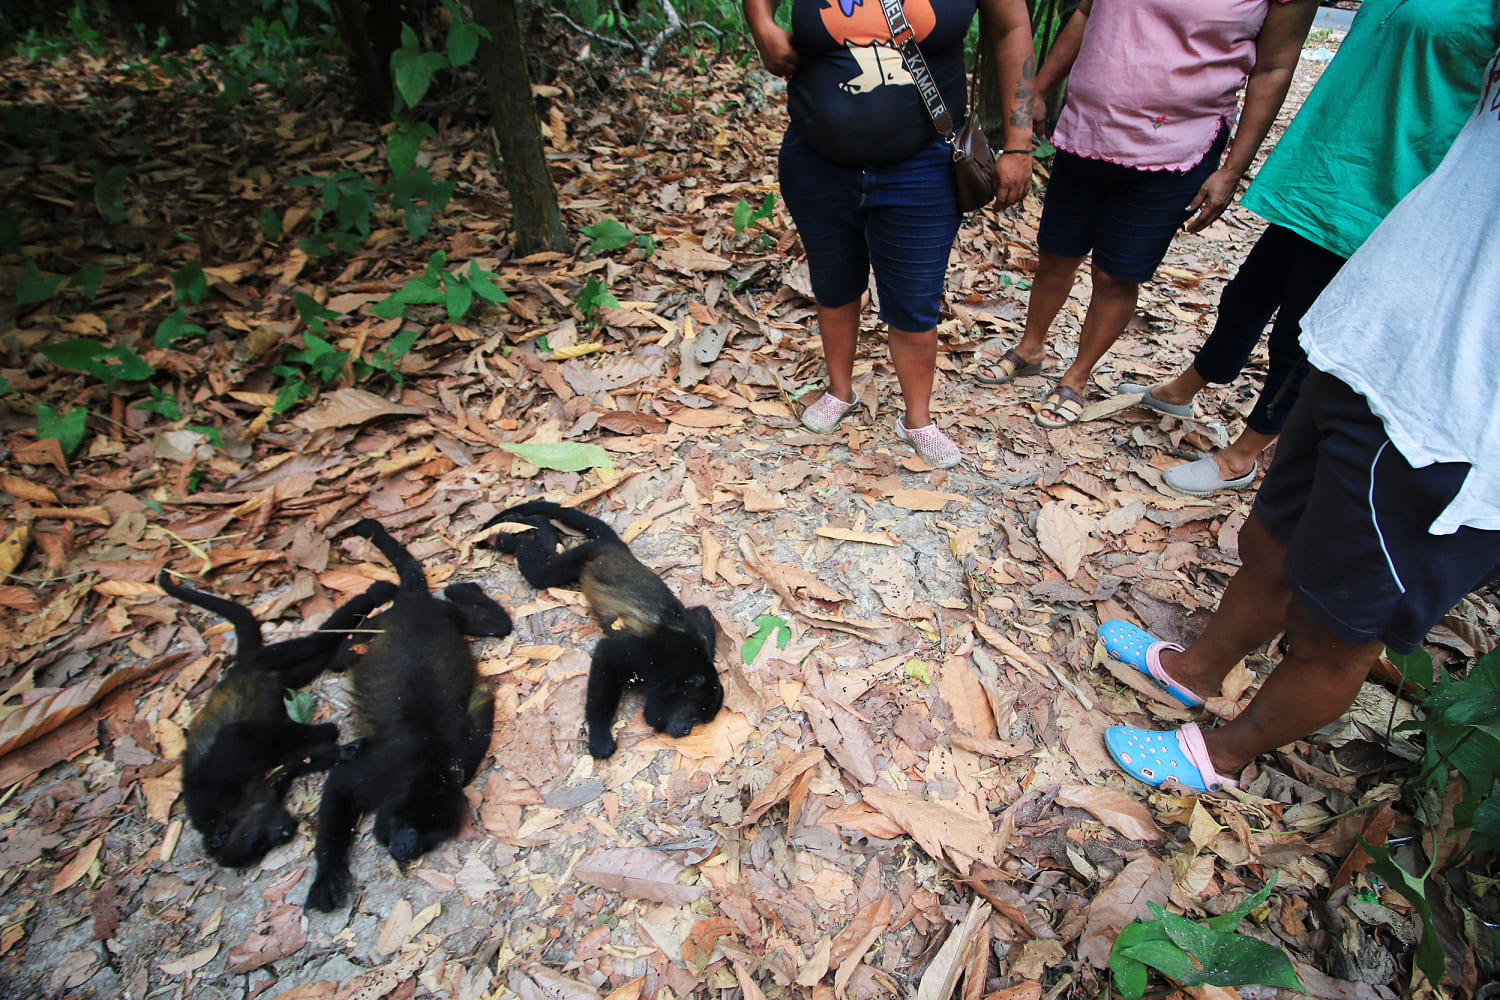 Threatened howler monkeys are dropping dead from trees as heat toll mounts in Mexico